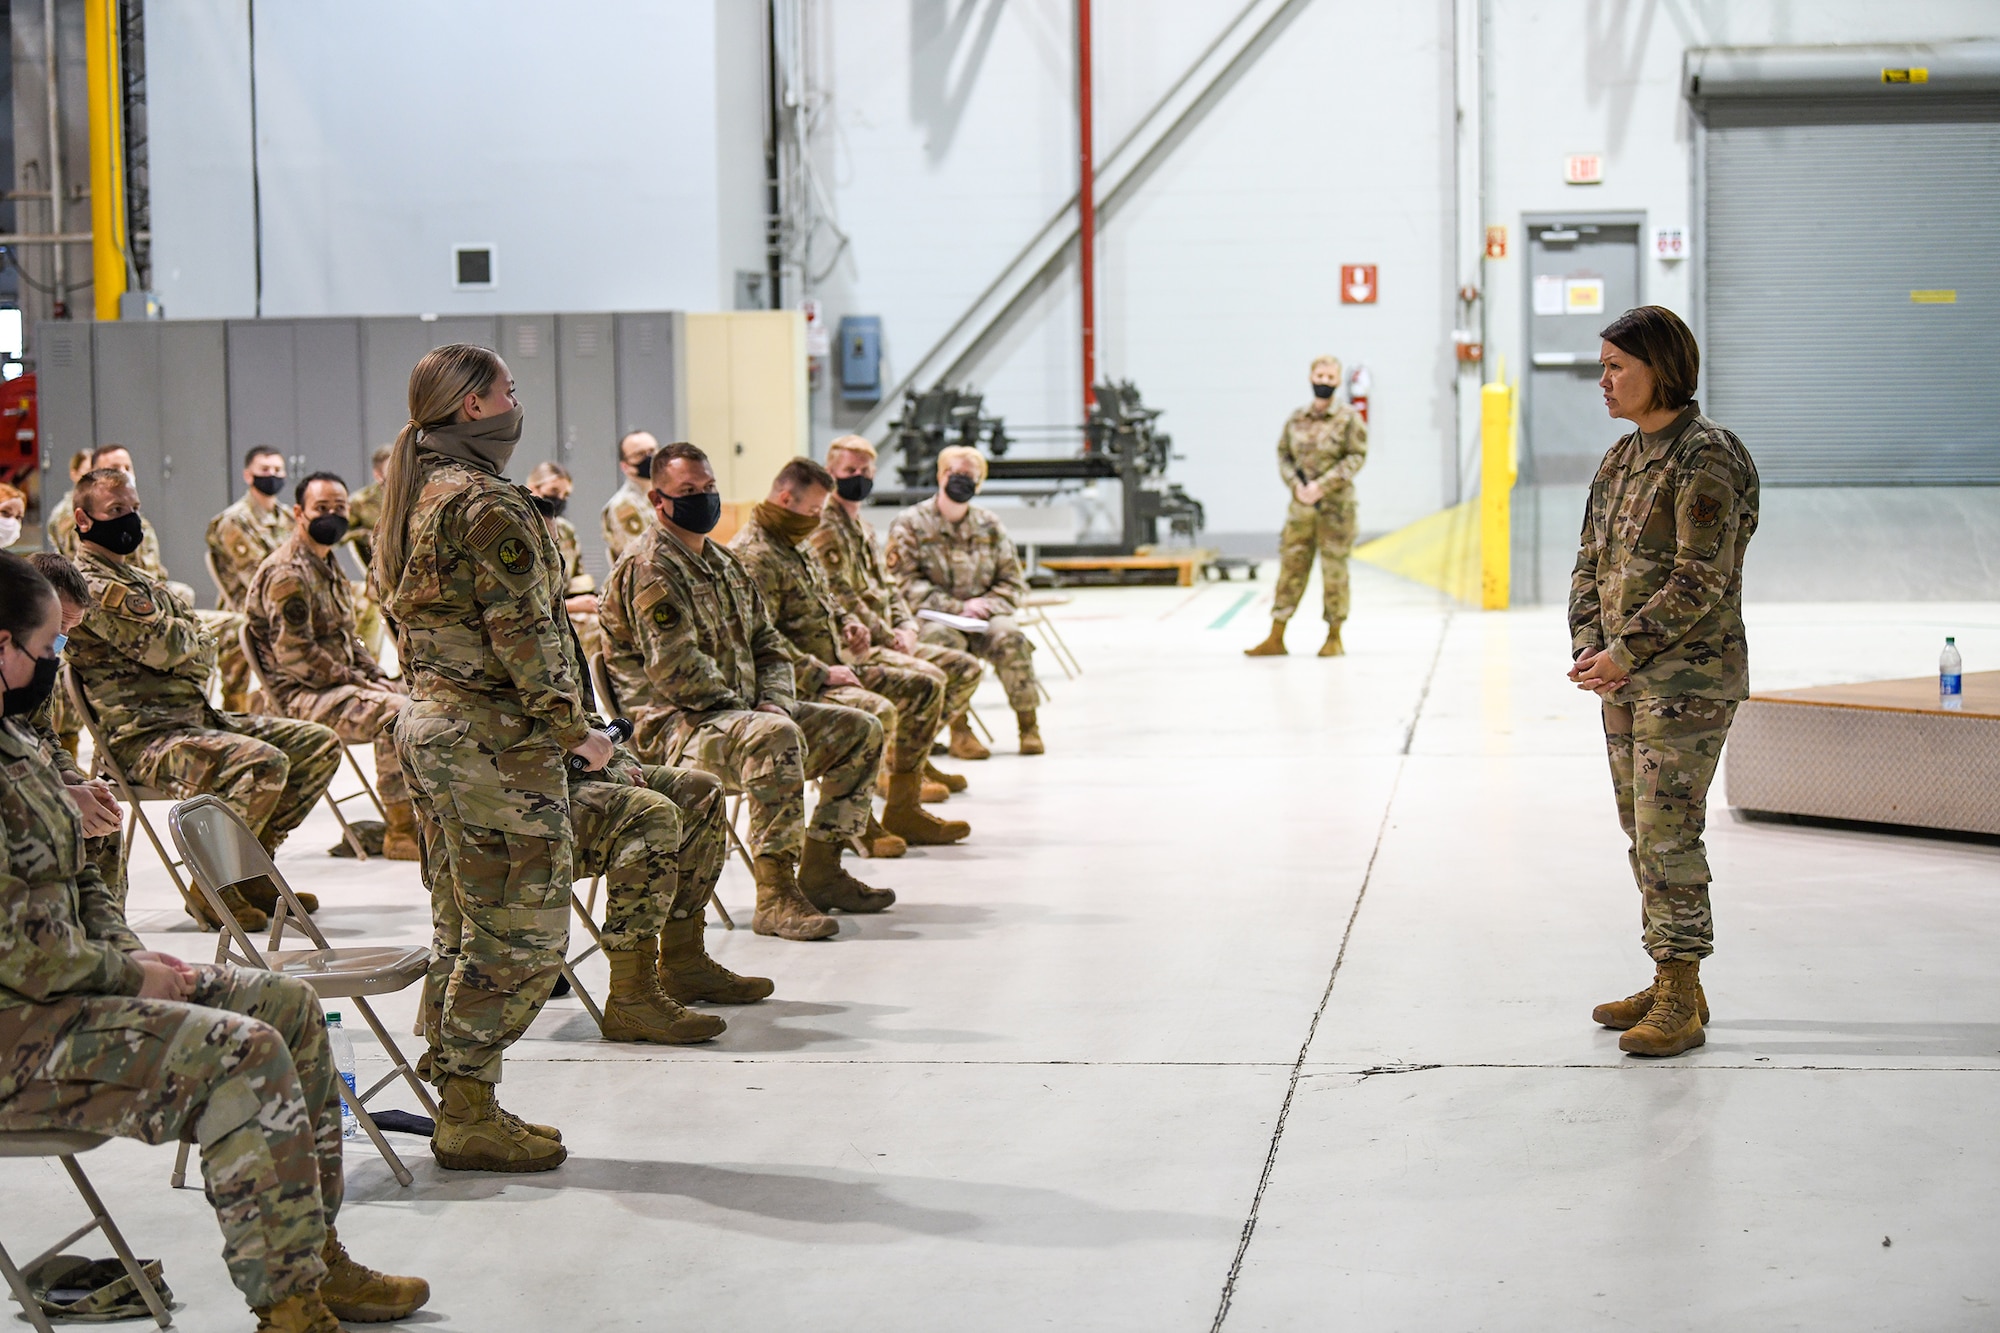 Chief Master Sgt. of the Air Force JoAnne Bass held an enlisted call with 445th Airlift Wing Airmen during one of her stops while visiting Wright-Patterson Air Force Base, Ohio Oct. 2, 2021.